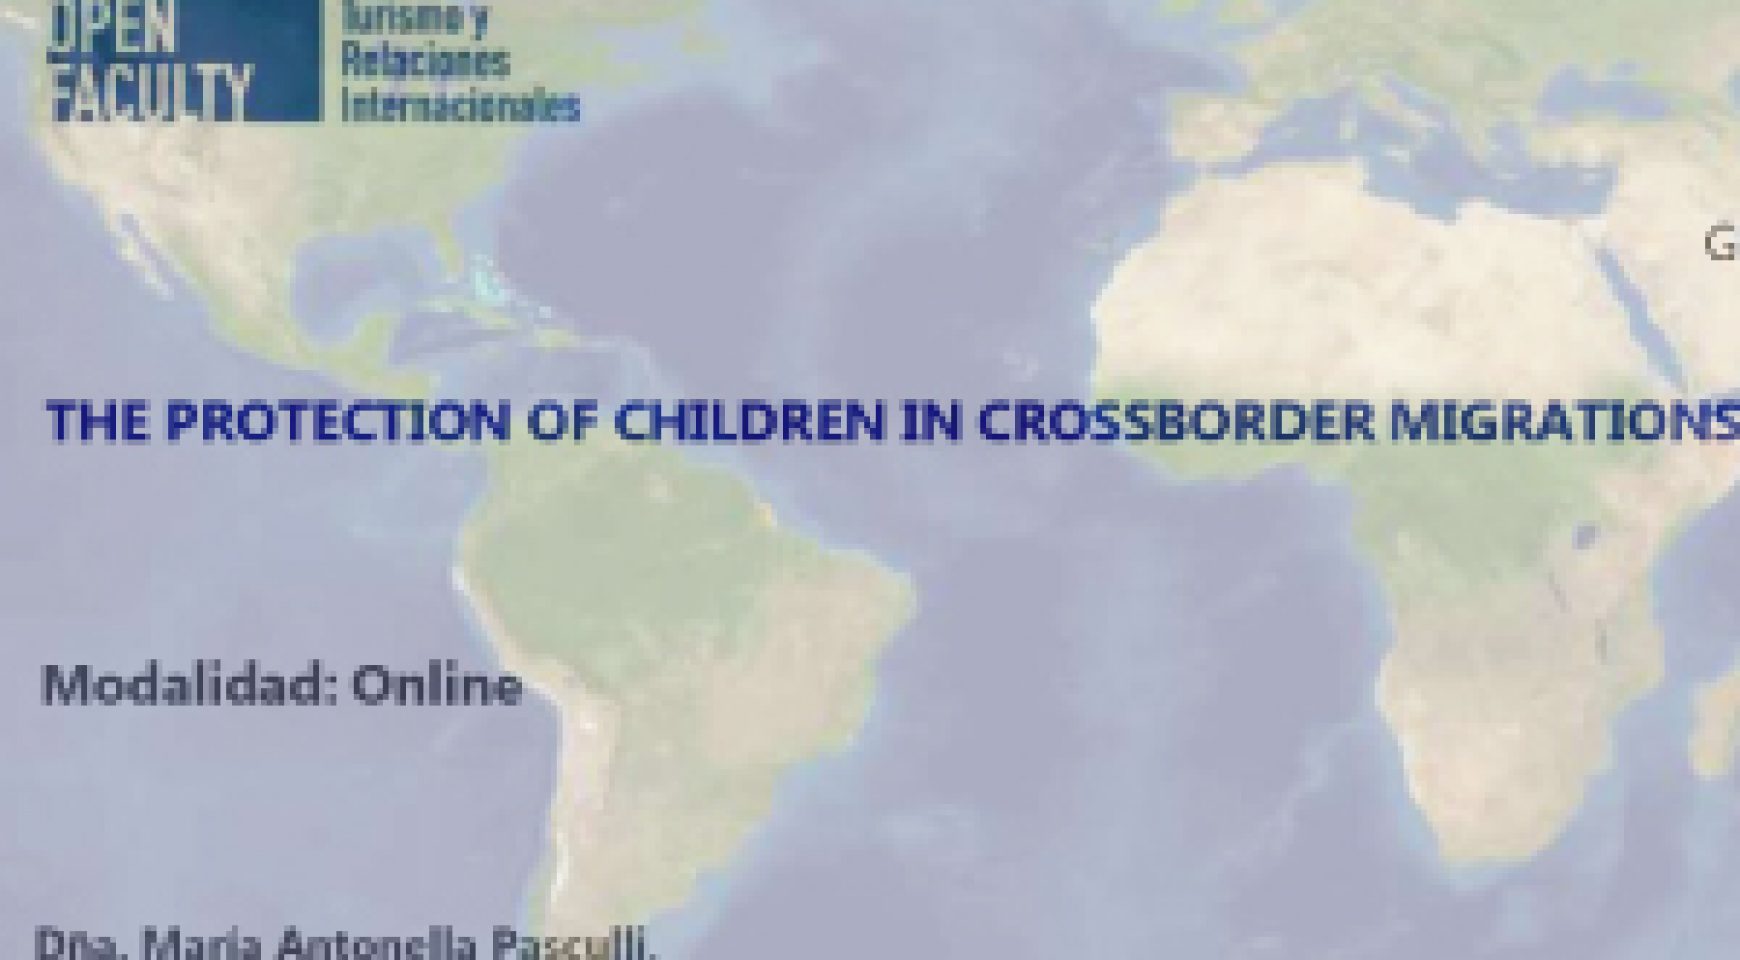 The Protection of Children in Crossborder Migrations